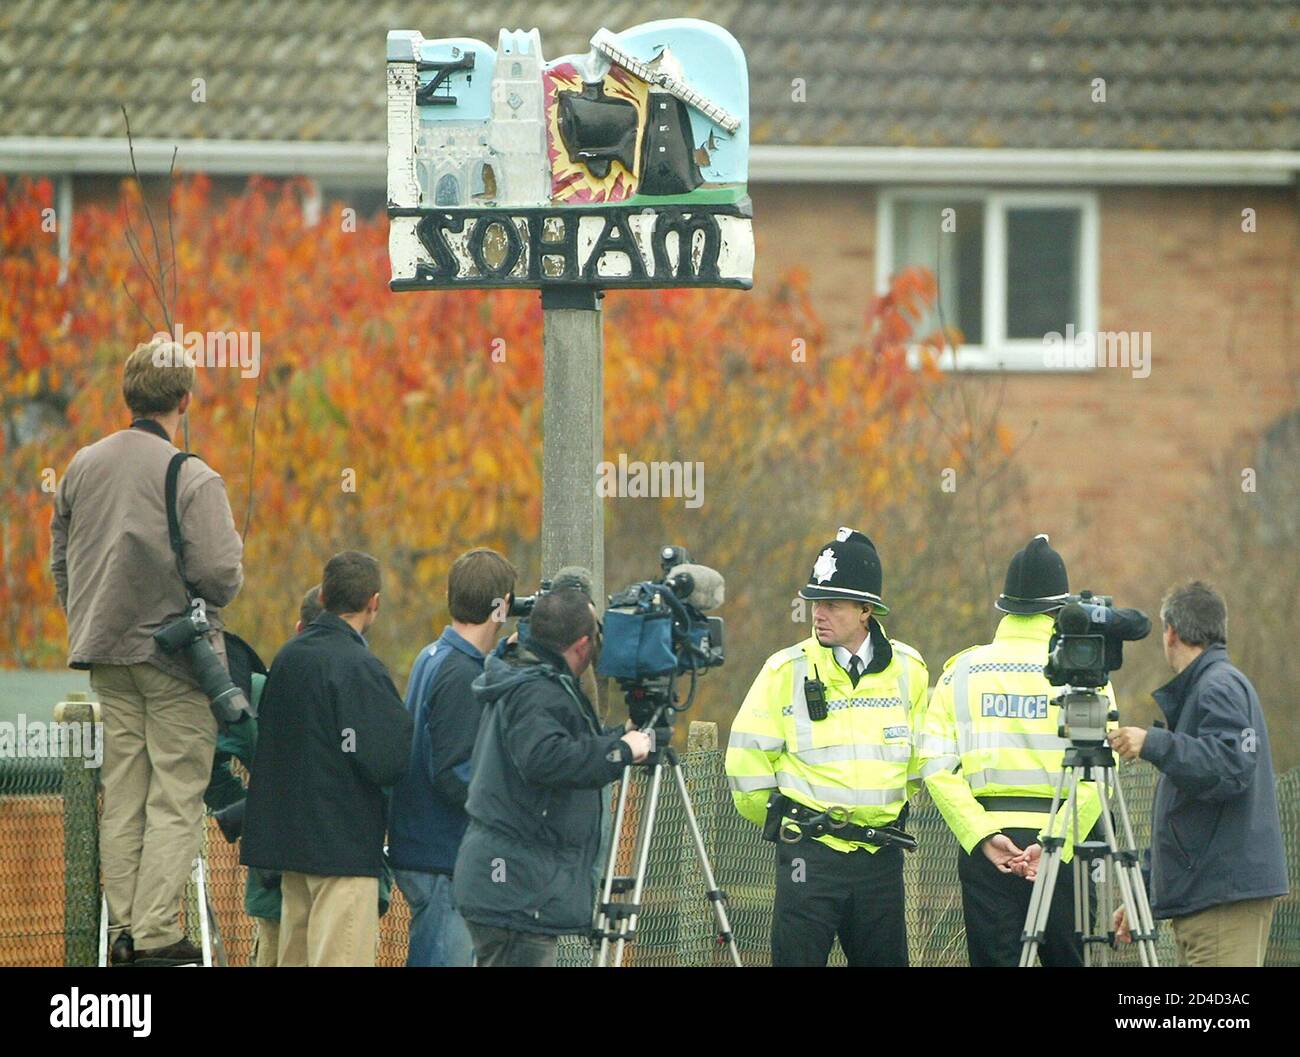 Reporters and cameramen stand with policemen before the coach containing the jurors in the Soham murder trial is escorted into the Cambridgeshire town of Soham November 10, 2003. The jury will be taken to various sites including the house at Number 5 College Close, where Ian Huntley lived and prosecutors say he murdered schoolgirls Holly Wells and Jessica Chapman last August. REUTERS/Peter Macdiarmid  JB Stock Photo